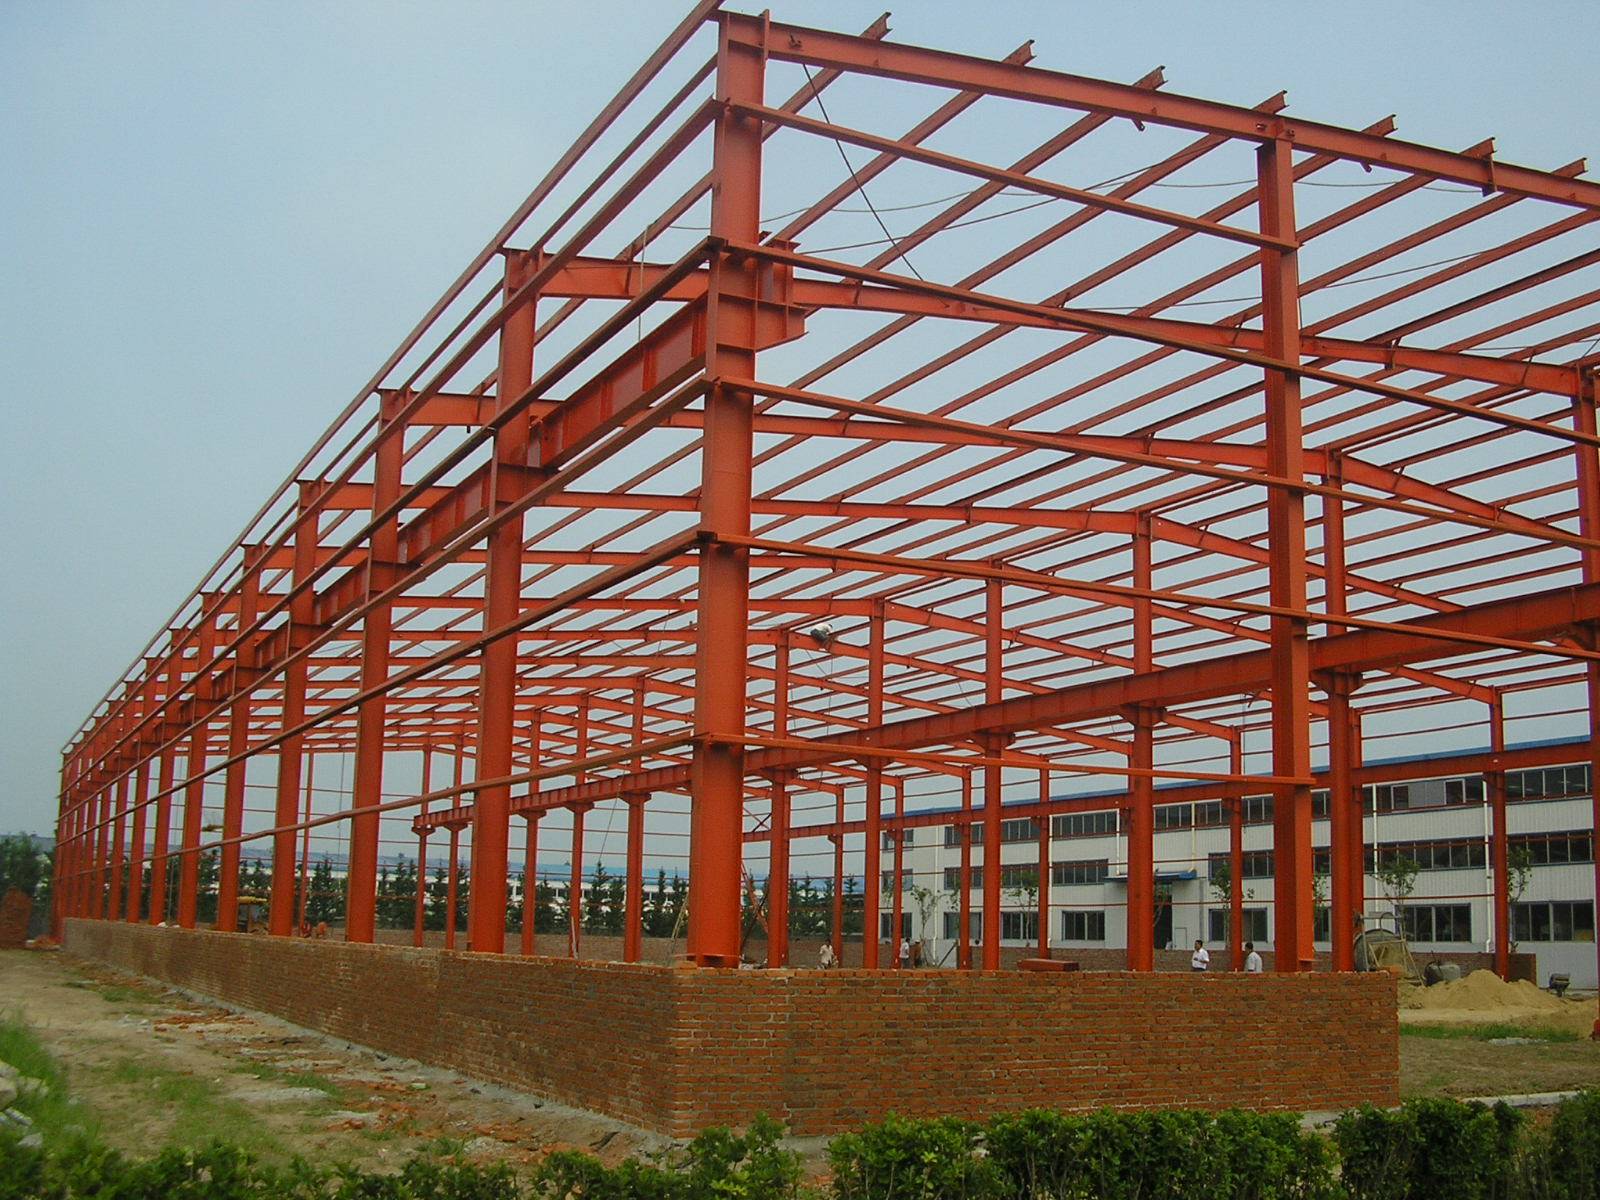 Special Price for Sports Center Steel Structure Building Tensile Membrane Structure Architectural Stadium Roofing Design Construction